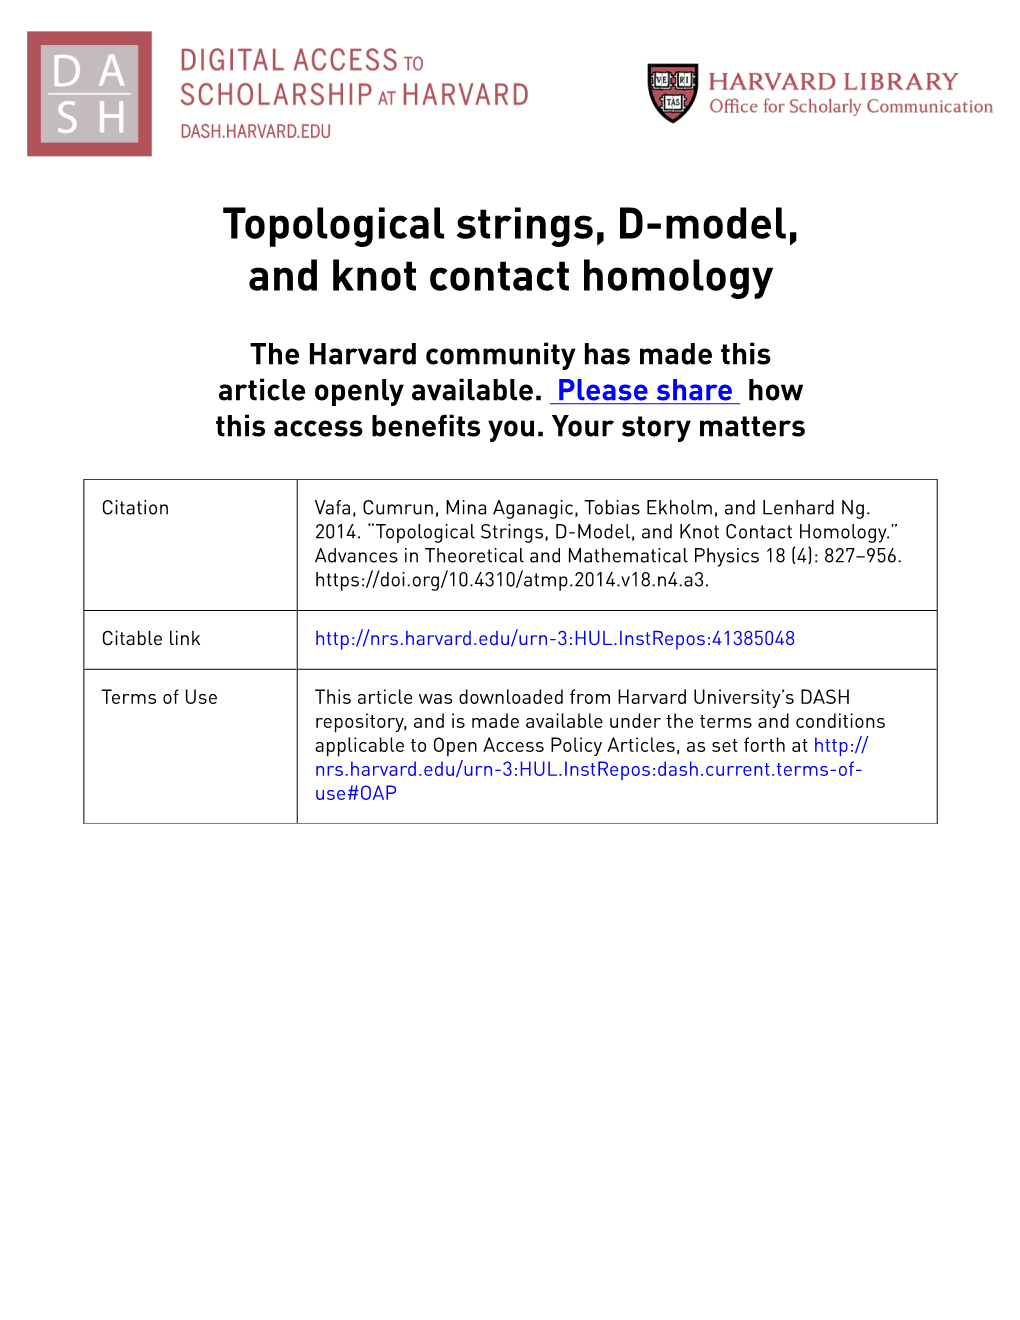 Topological Strings, D-Model, and Knot Contact Homology